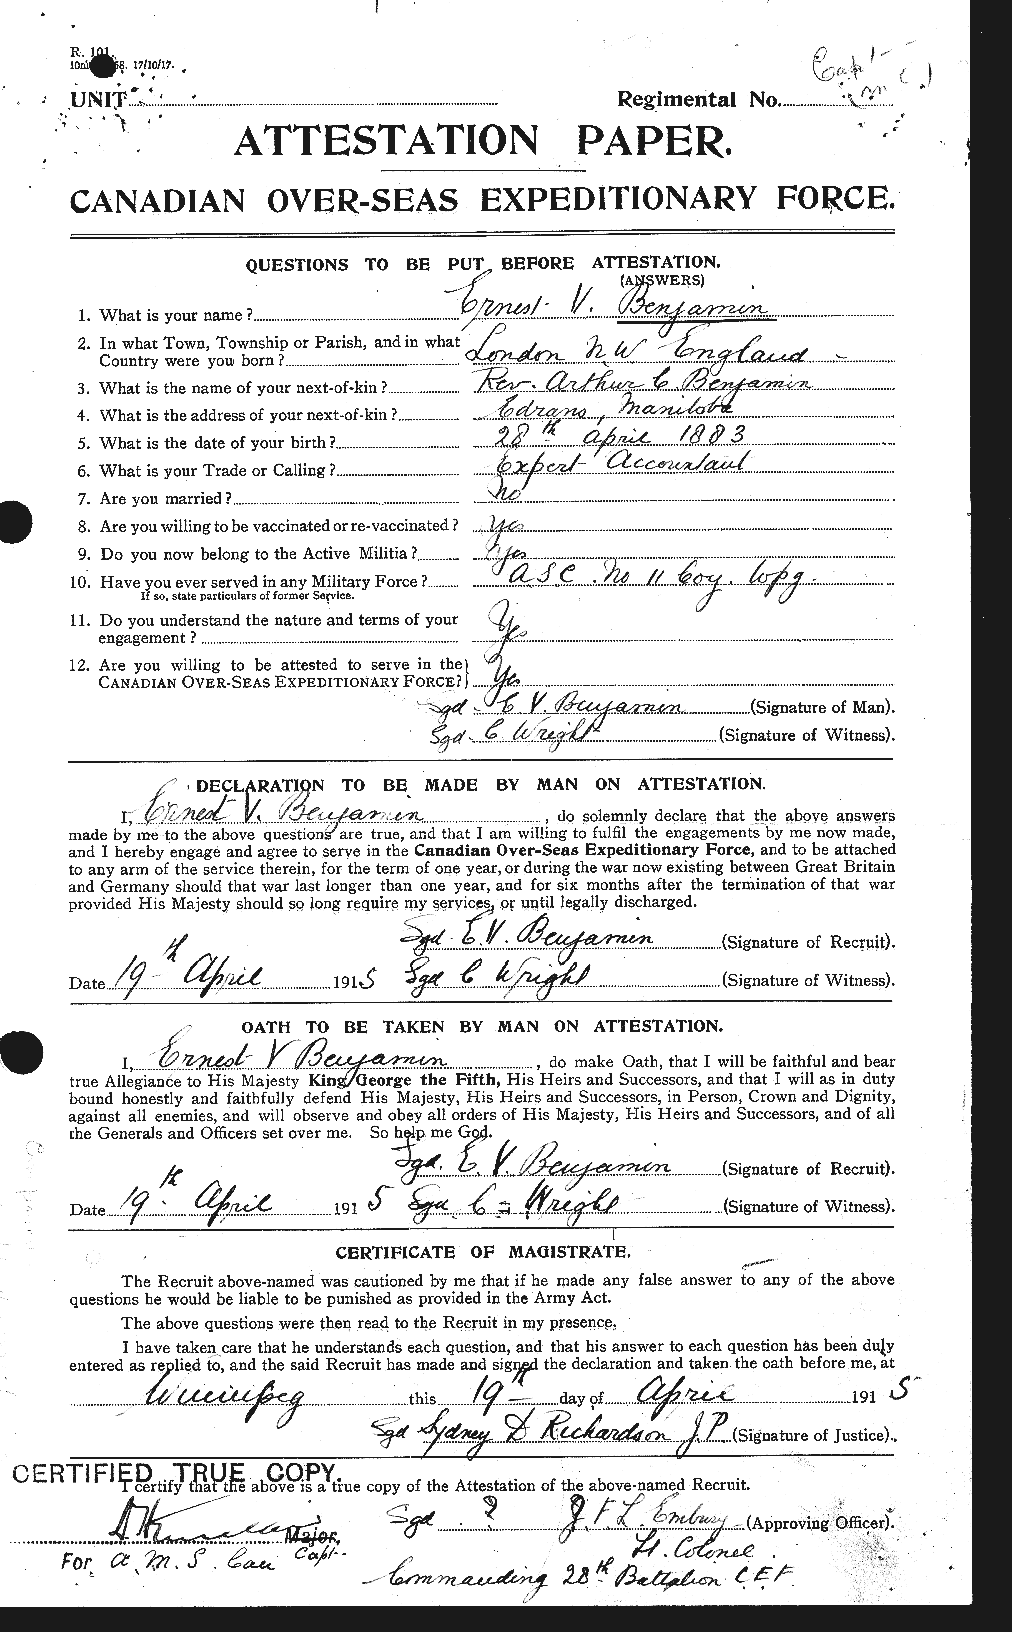 Personnel Records of the First World War - CEF 233158a